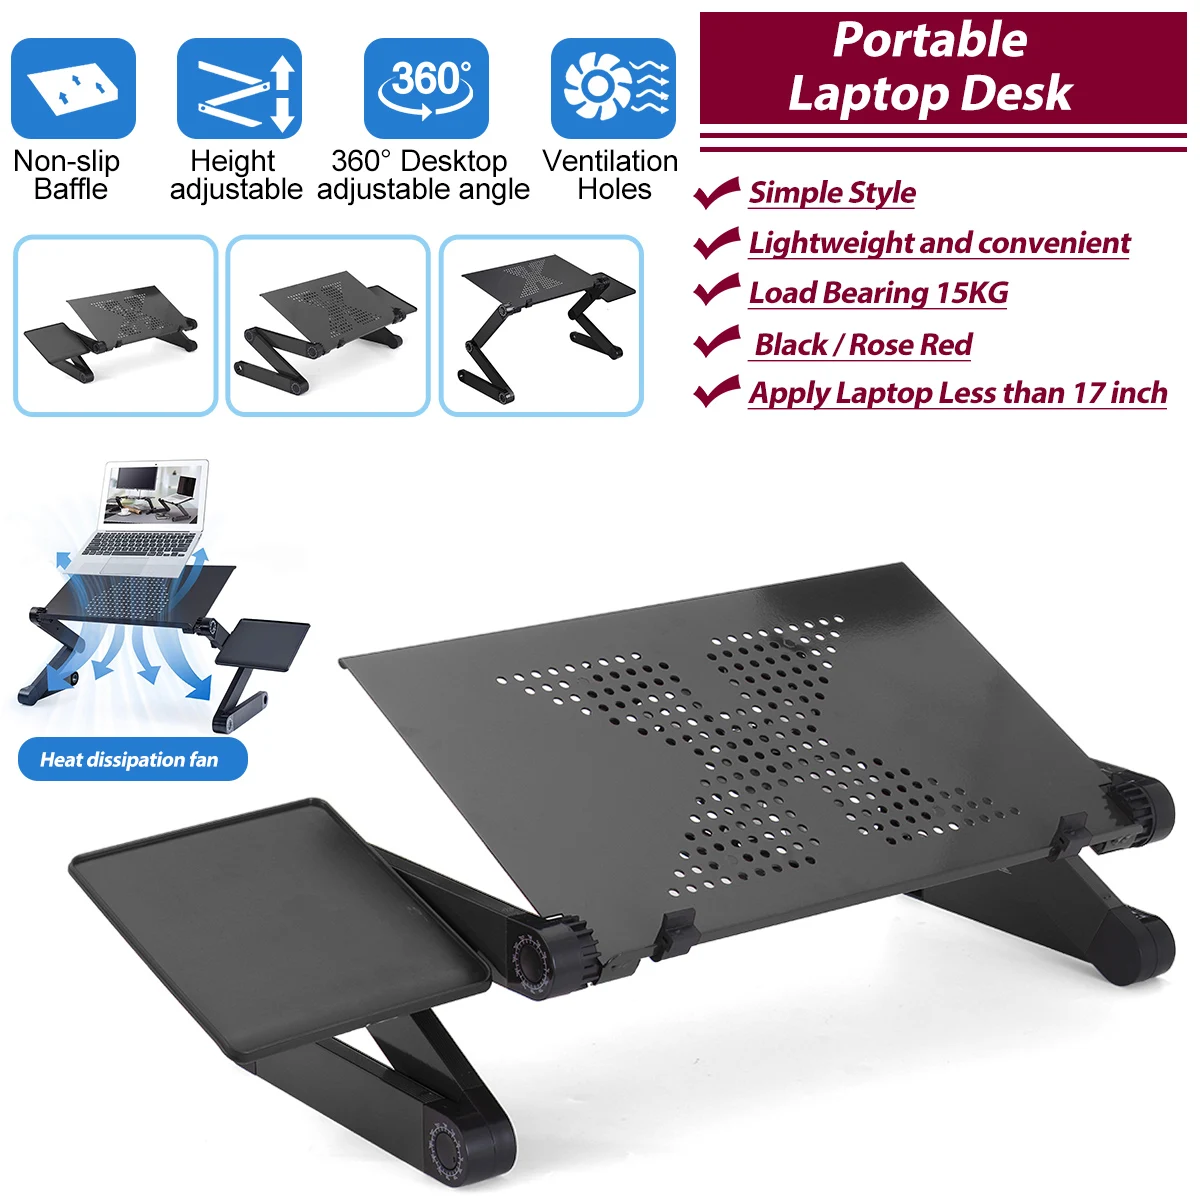 360-Degree Rotation Multifunctional Portable Folding Laptop Table with Fan Black 